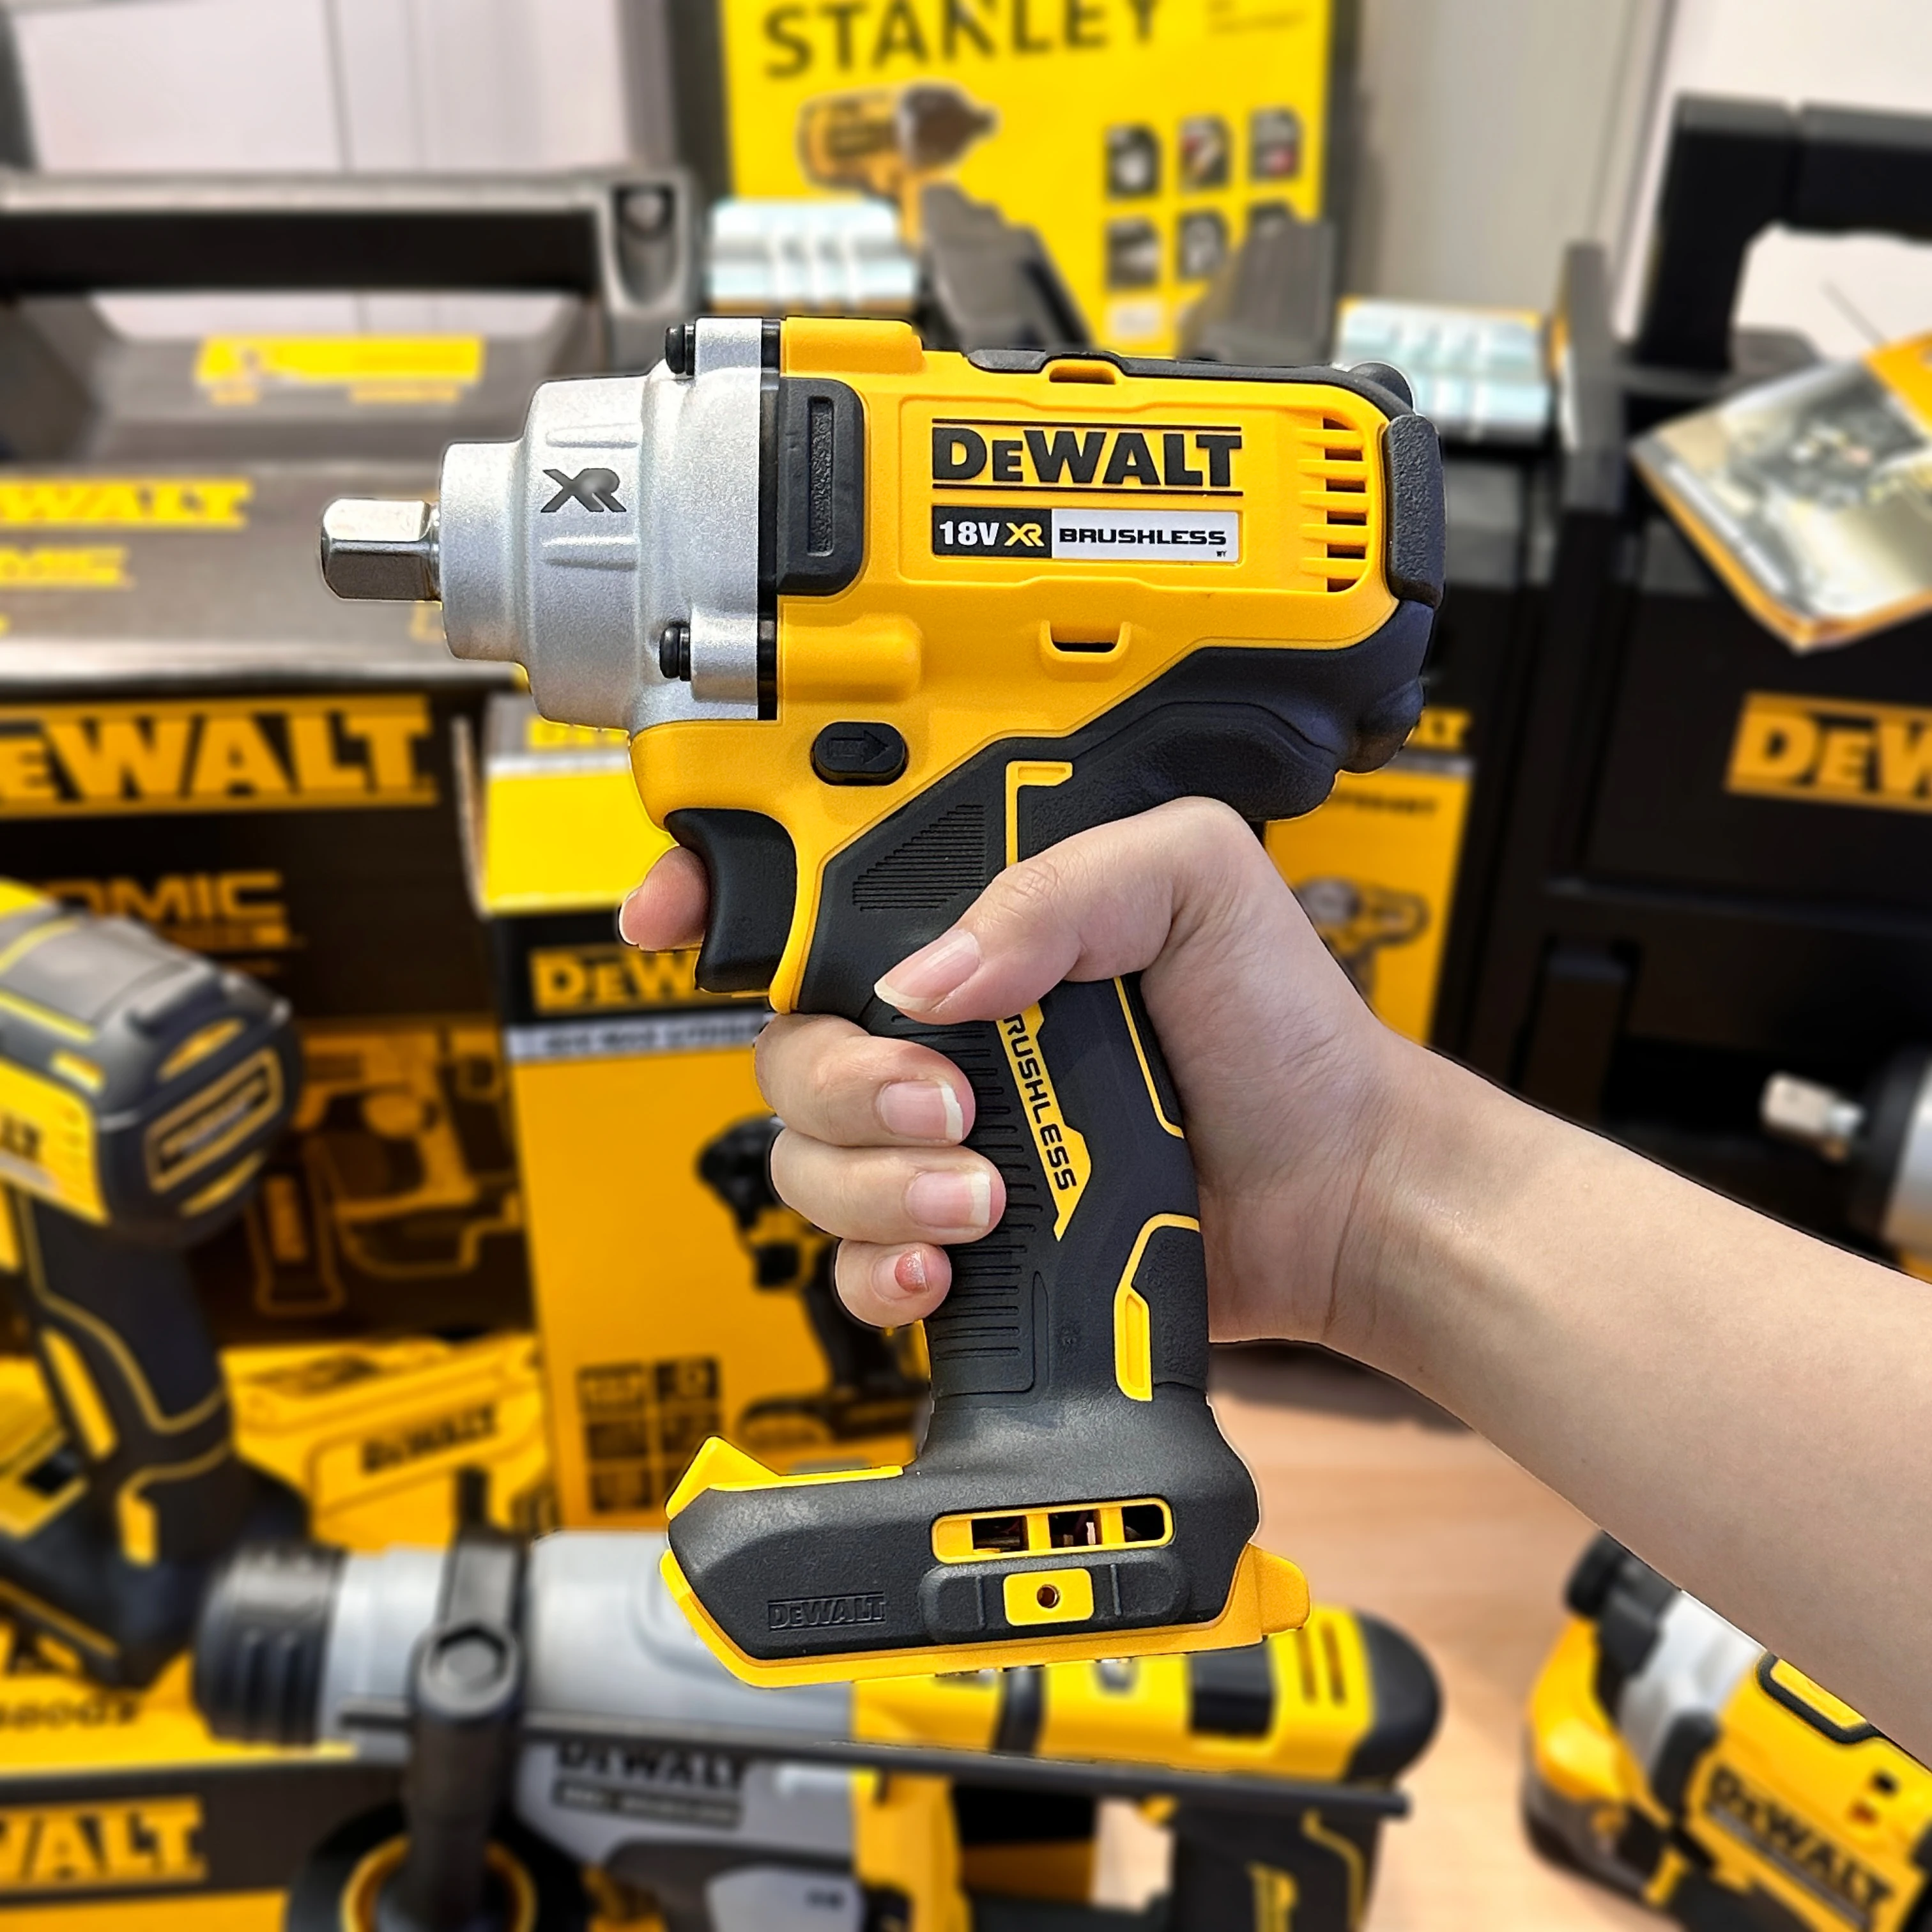 DEWALT 20V MAX XR Impact Wrench, Cordless, 1/2-Inch with Detent Pin Anvil,  330-lbs of Torque, 3,100 IPM, Bare Tool Only (DCF894B) 